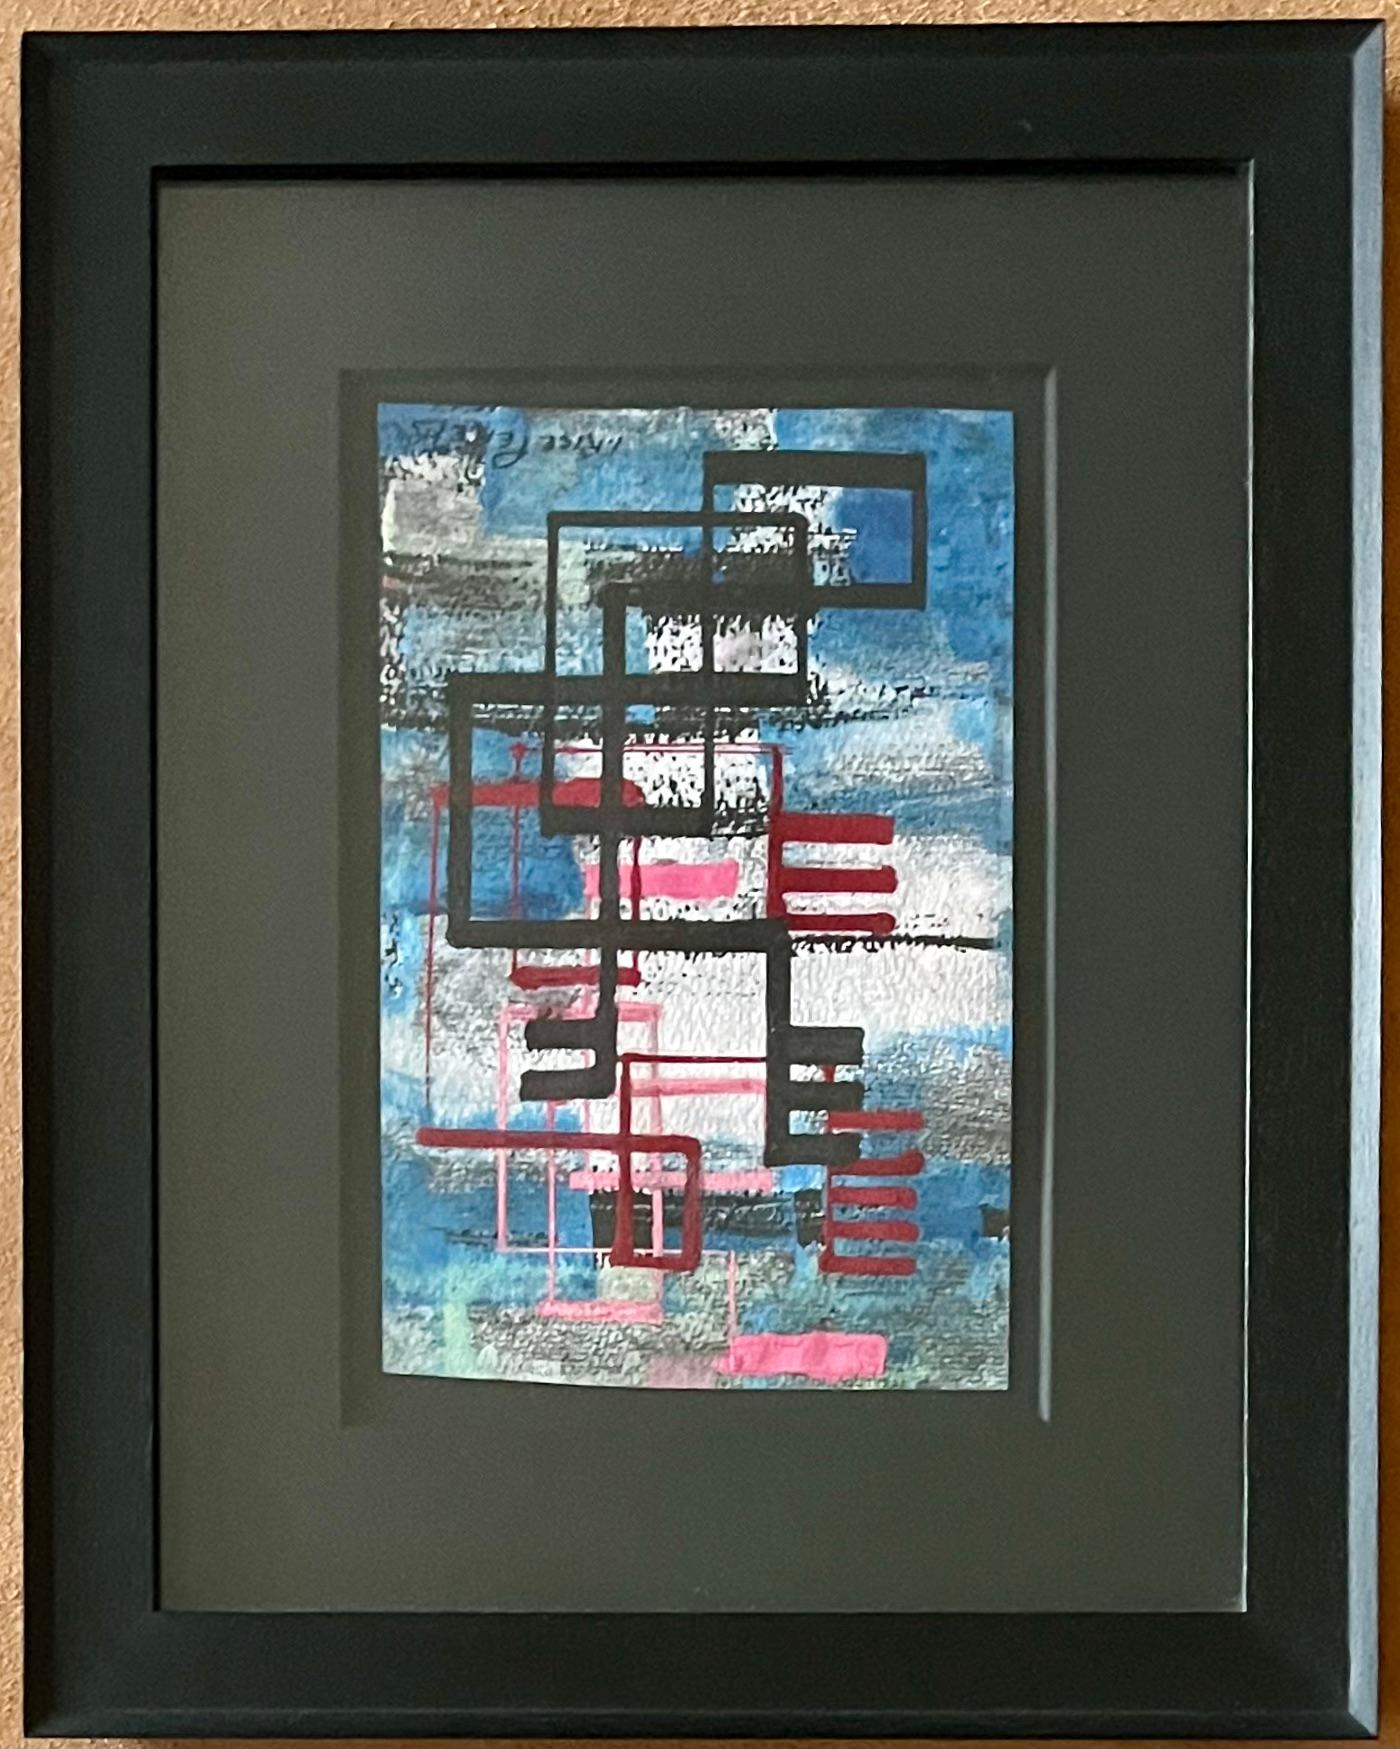 ABSTRACT American Woman Abstract Non-objective Mid 20th Century Modern Drawing

Irene Rice Pereira (1902-1971)
Abstract
8 1/2 x 5 1/2 inches
Watercolor, gouache, and ink on black paper
Signed lower right
Framed by Bark

BIO
rene Pereira was born in